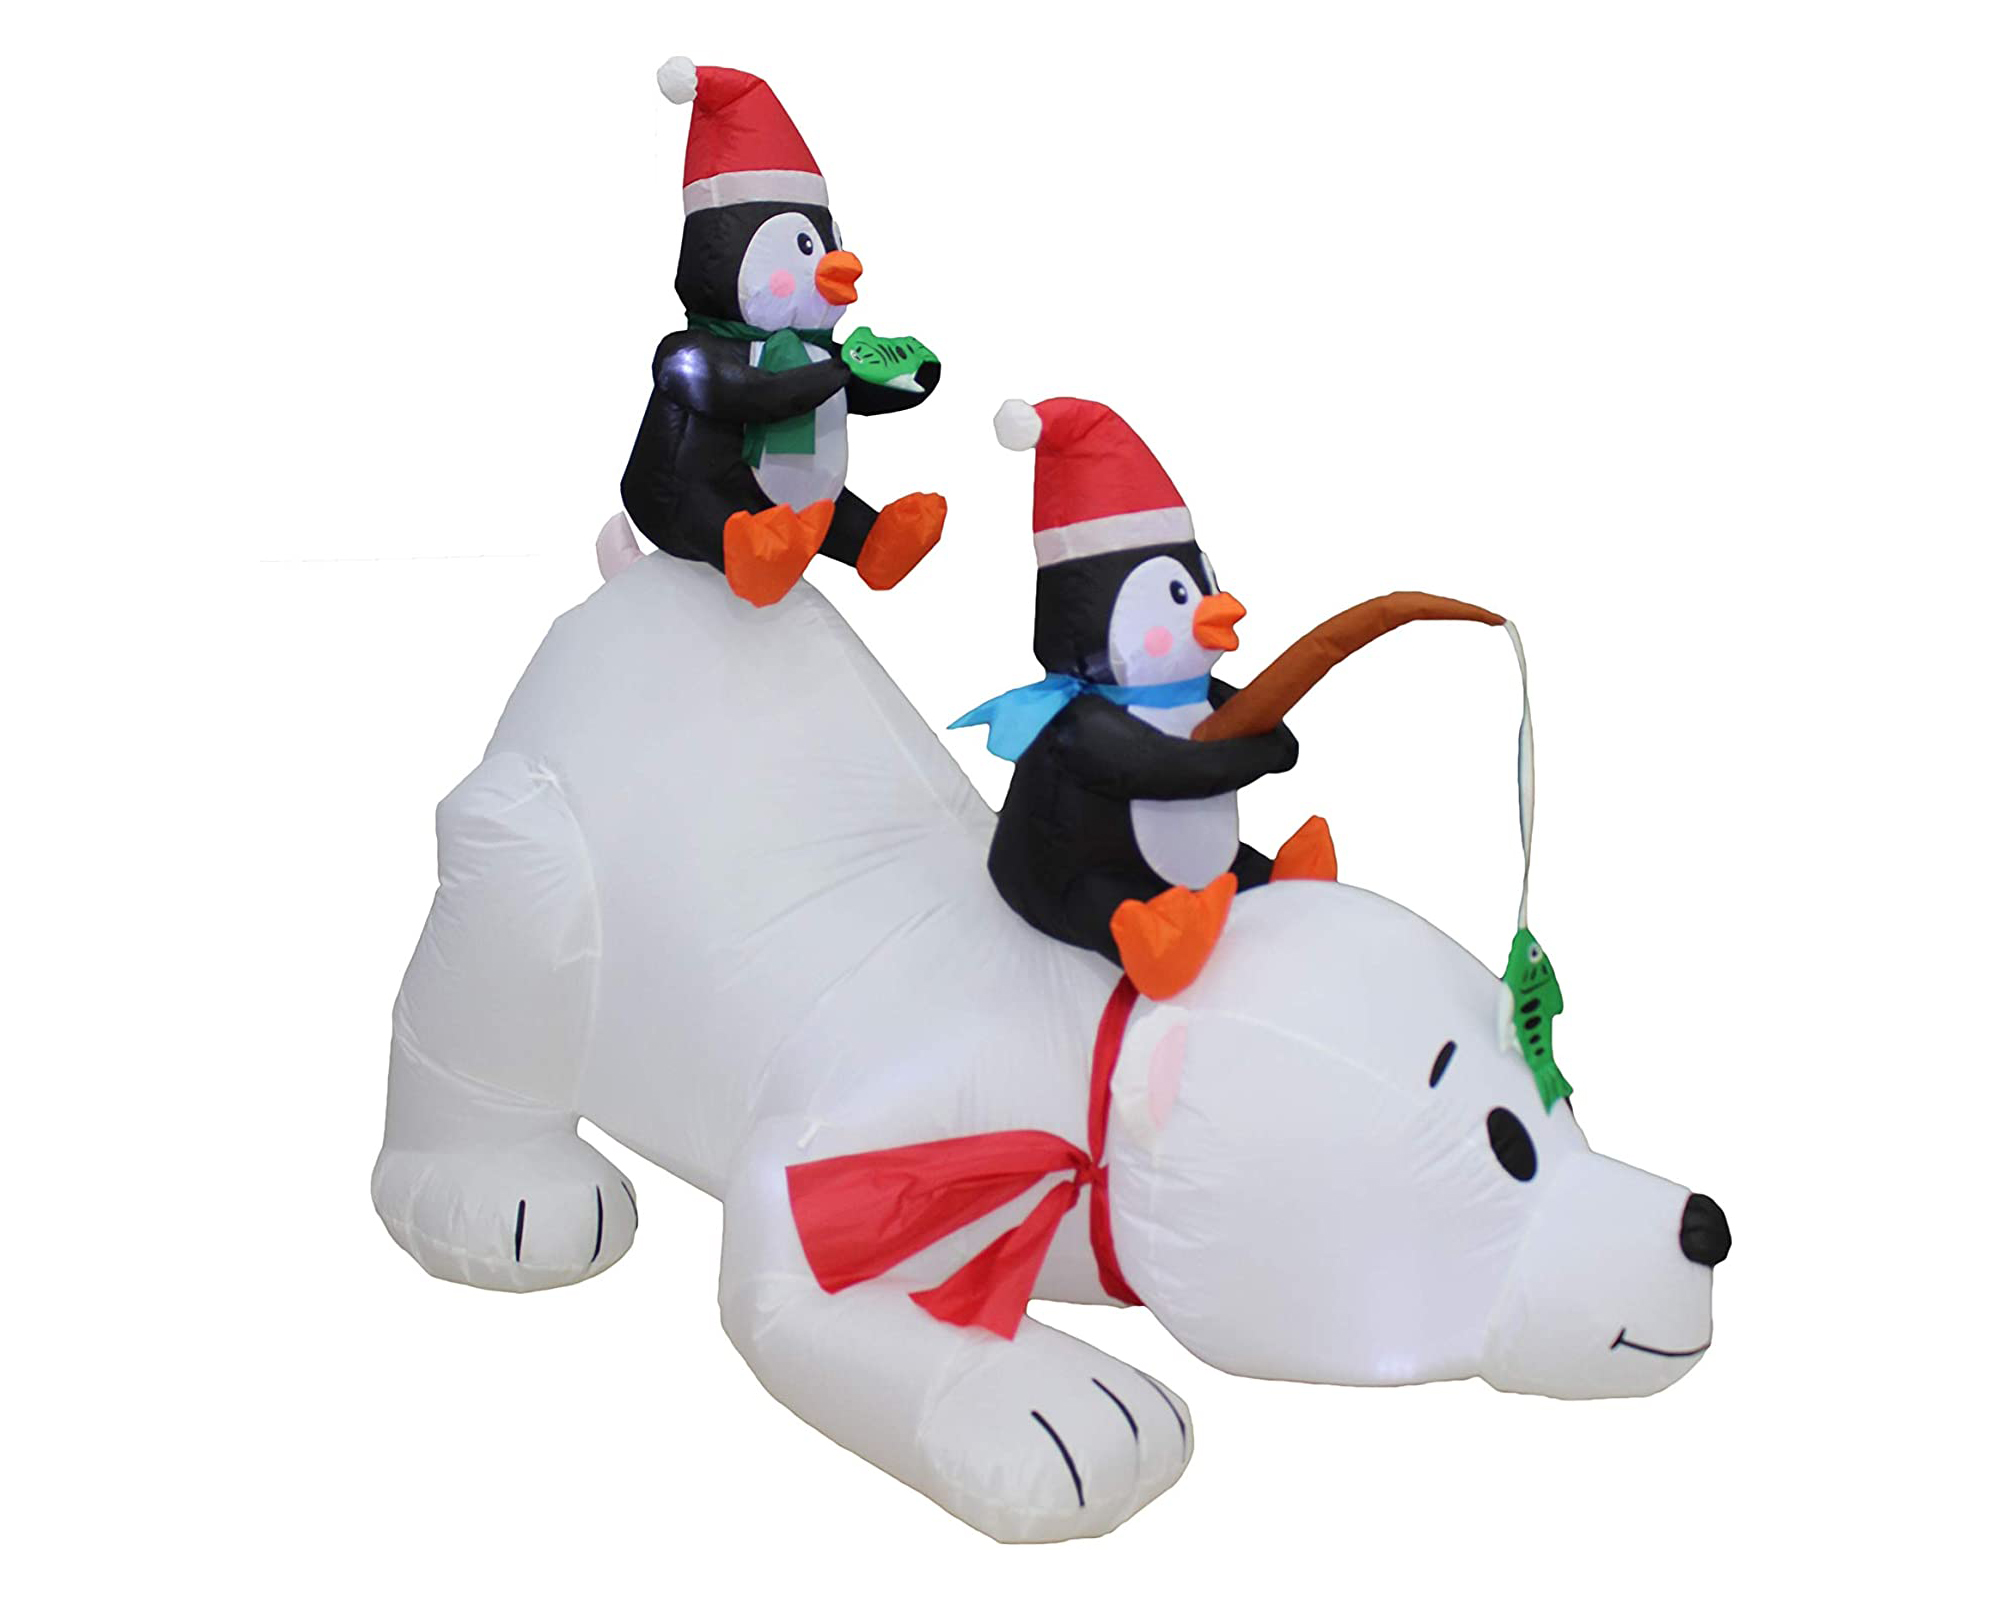 6 Ft blow up polar bear and penguins riding polar bear with built-in lights and sandbags tether for indoor and outdoor decor